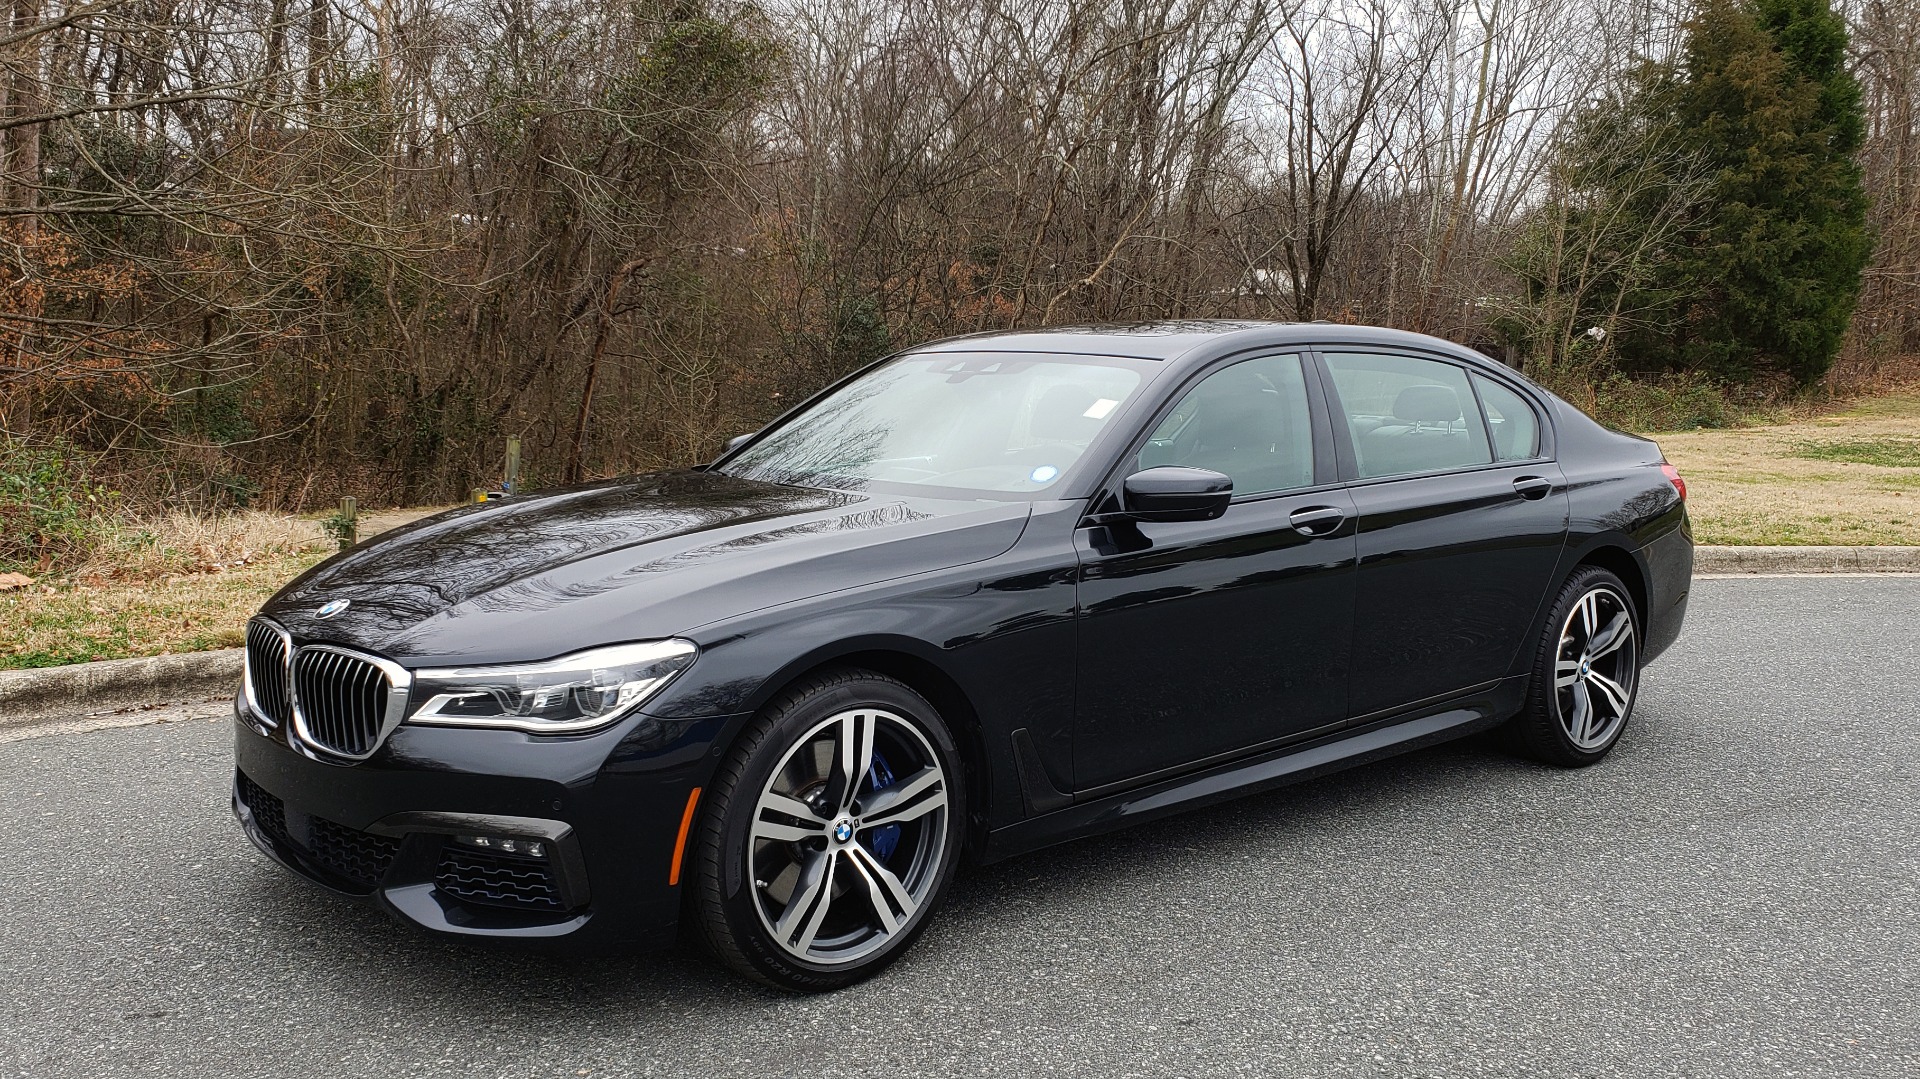 Used 2017 BMW 7 SERIES 750i M-SPORT / AUTOBAHN / EXEC / DRVR ASST PLUS II / CLD WTHR for sale Sold at Formula Imports in Charlotte NC 28227 1